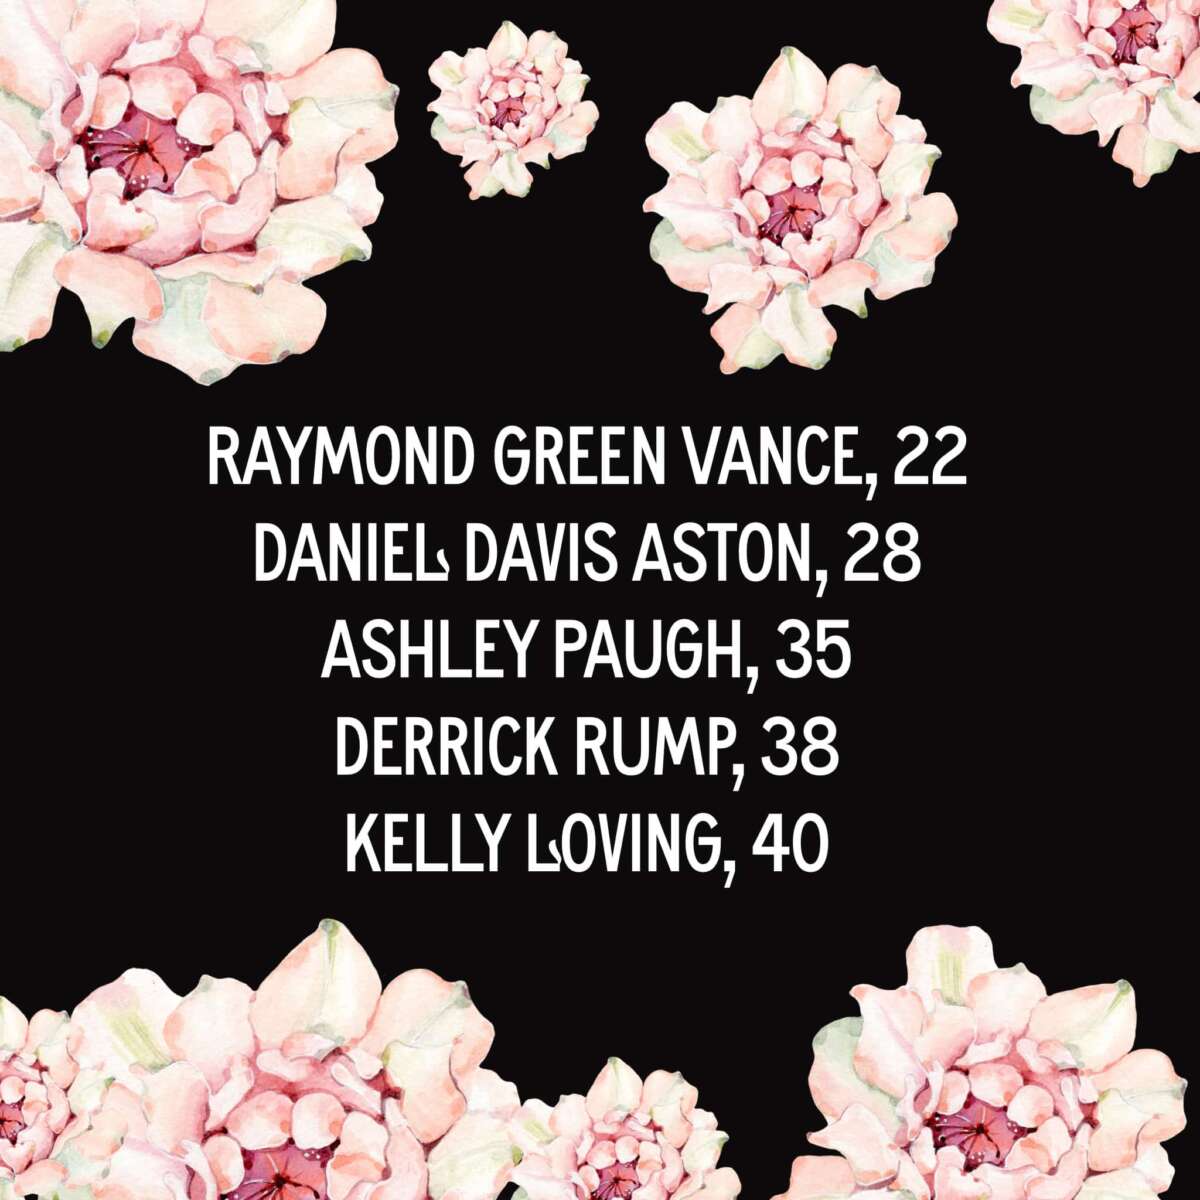 On November 20, Transgender Day of Remembrance, Anderson Lee Aldrich walked into Club Q and within a matter of seconds, unleashed a marauding storm of bullets from their high-powered assault rifle, killing five people: Raymond Green Vance (22), Daniel Davis Aston (28), Ashley Paugh (35), Derrick Rump (38), and Kelly Loving (40)